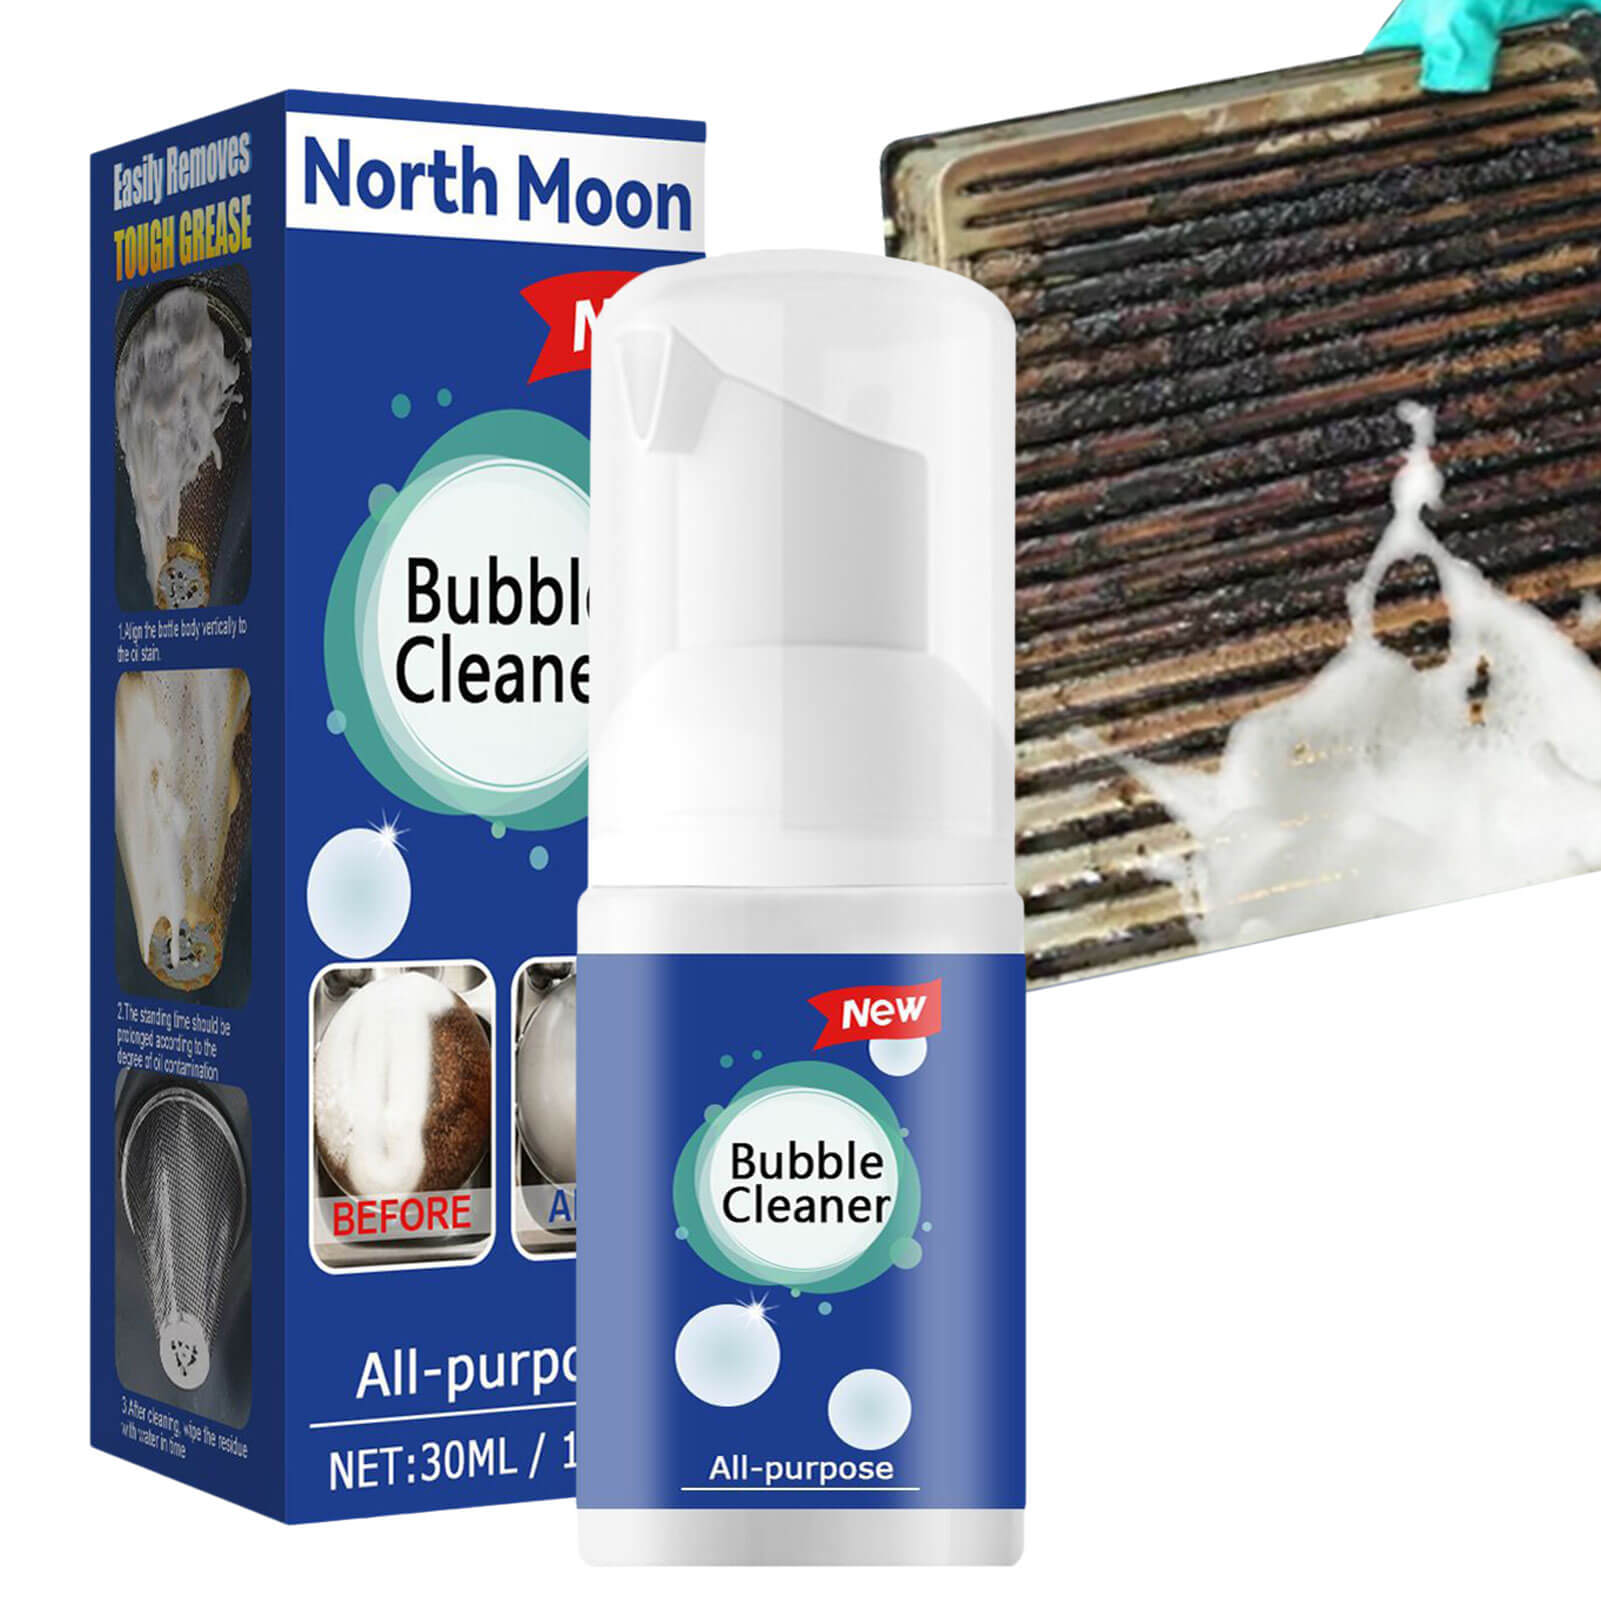  All Purpose Rinse Cleaning Foam, North Moon Bubble Cleaner Foam,  All-purpose Bubble Cleaner, Kitchen Bubble Cleaner Spray, Foaming Heavy Oil  Stain Remover Cleaner (3PCS, 30ML) : Health & Household